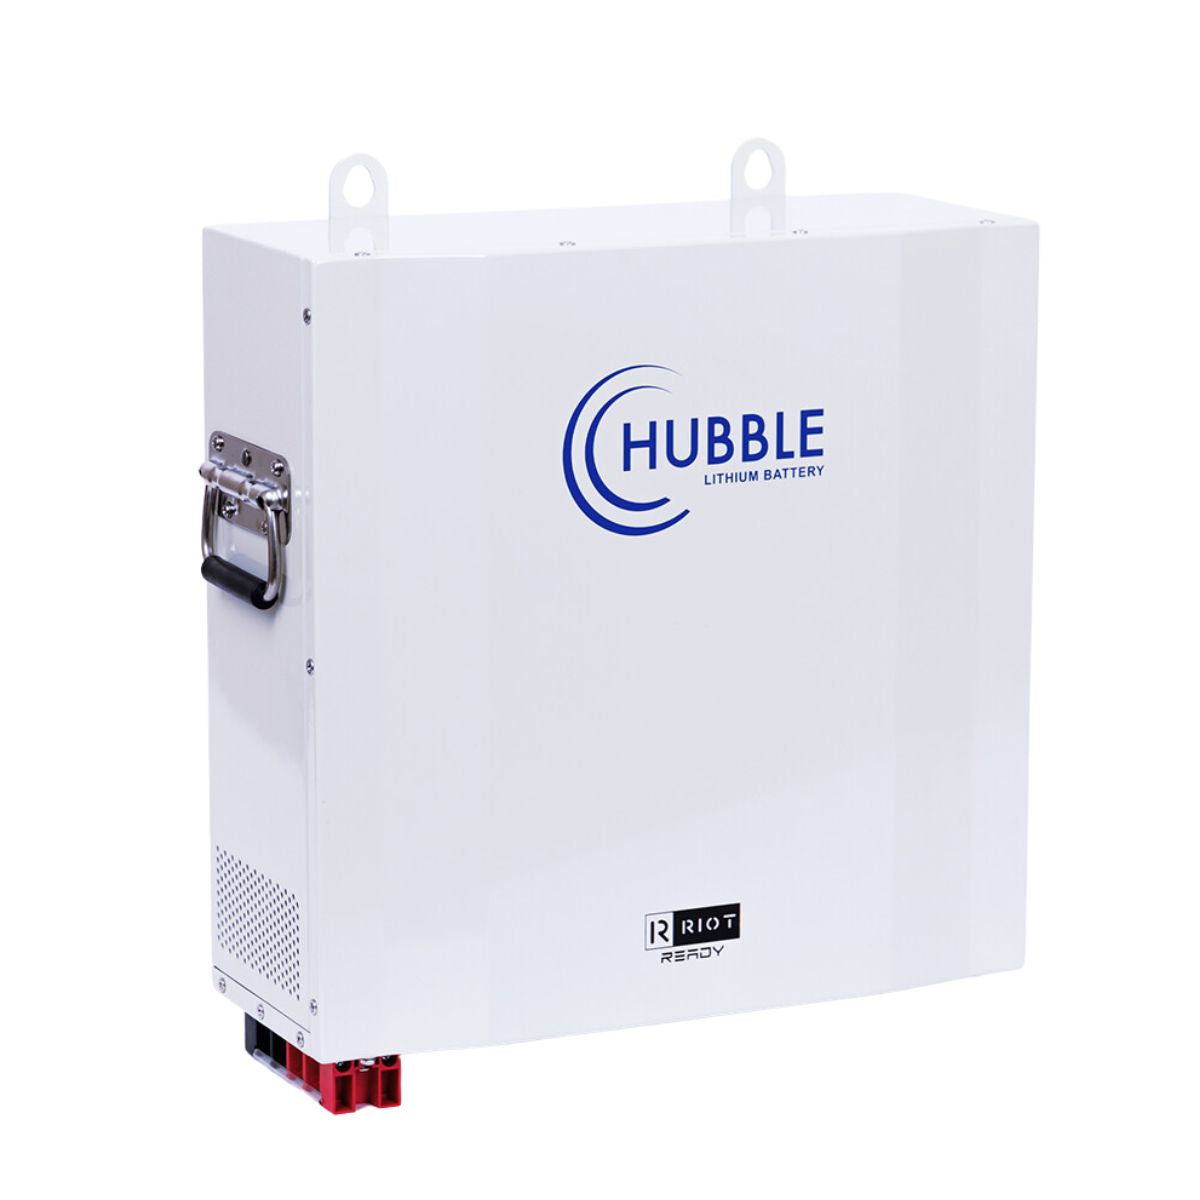 Hubble AM-4 100Ah 25V 2.75kWh Lithium Battery